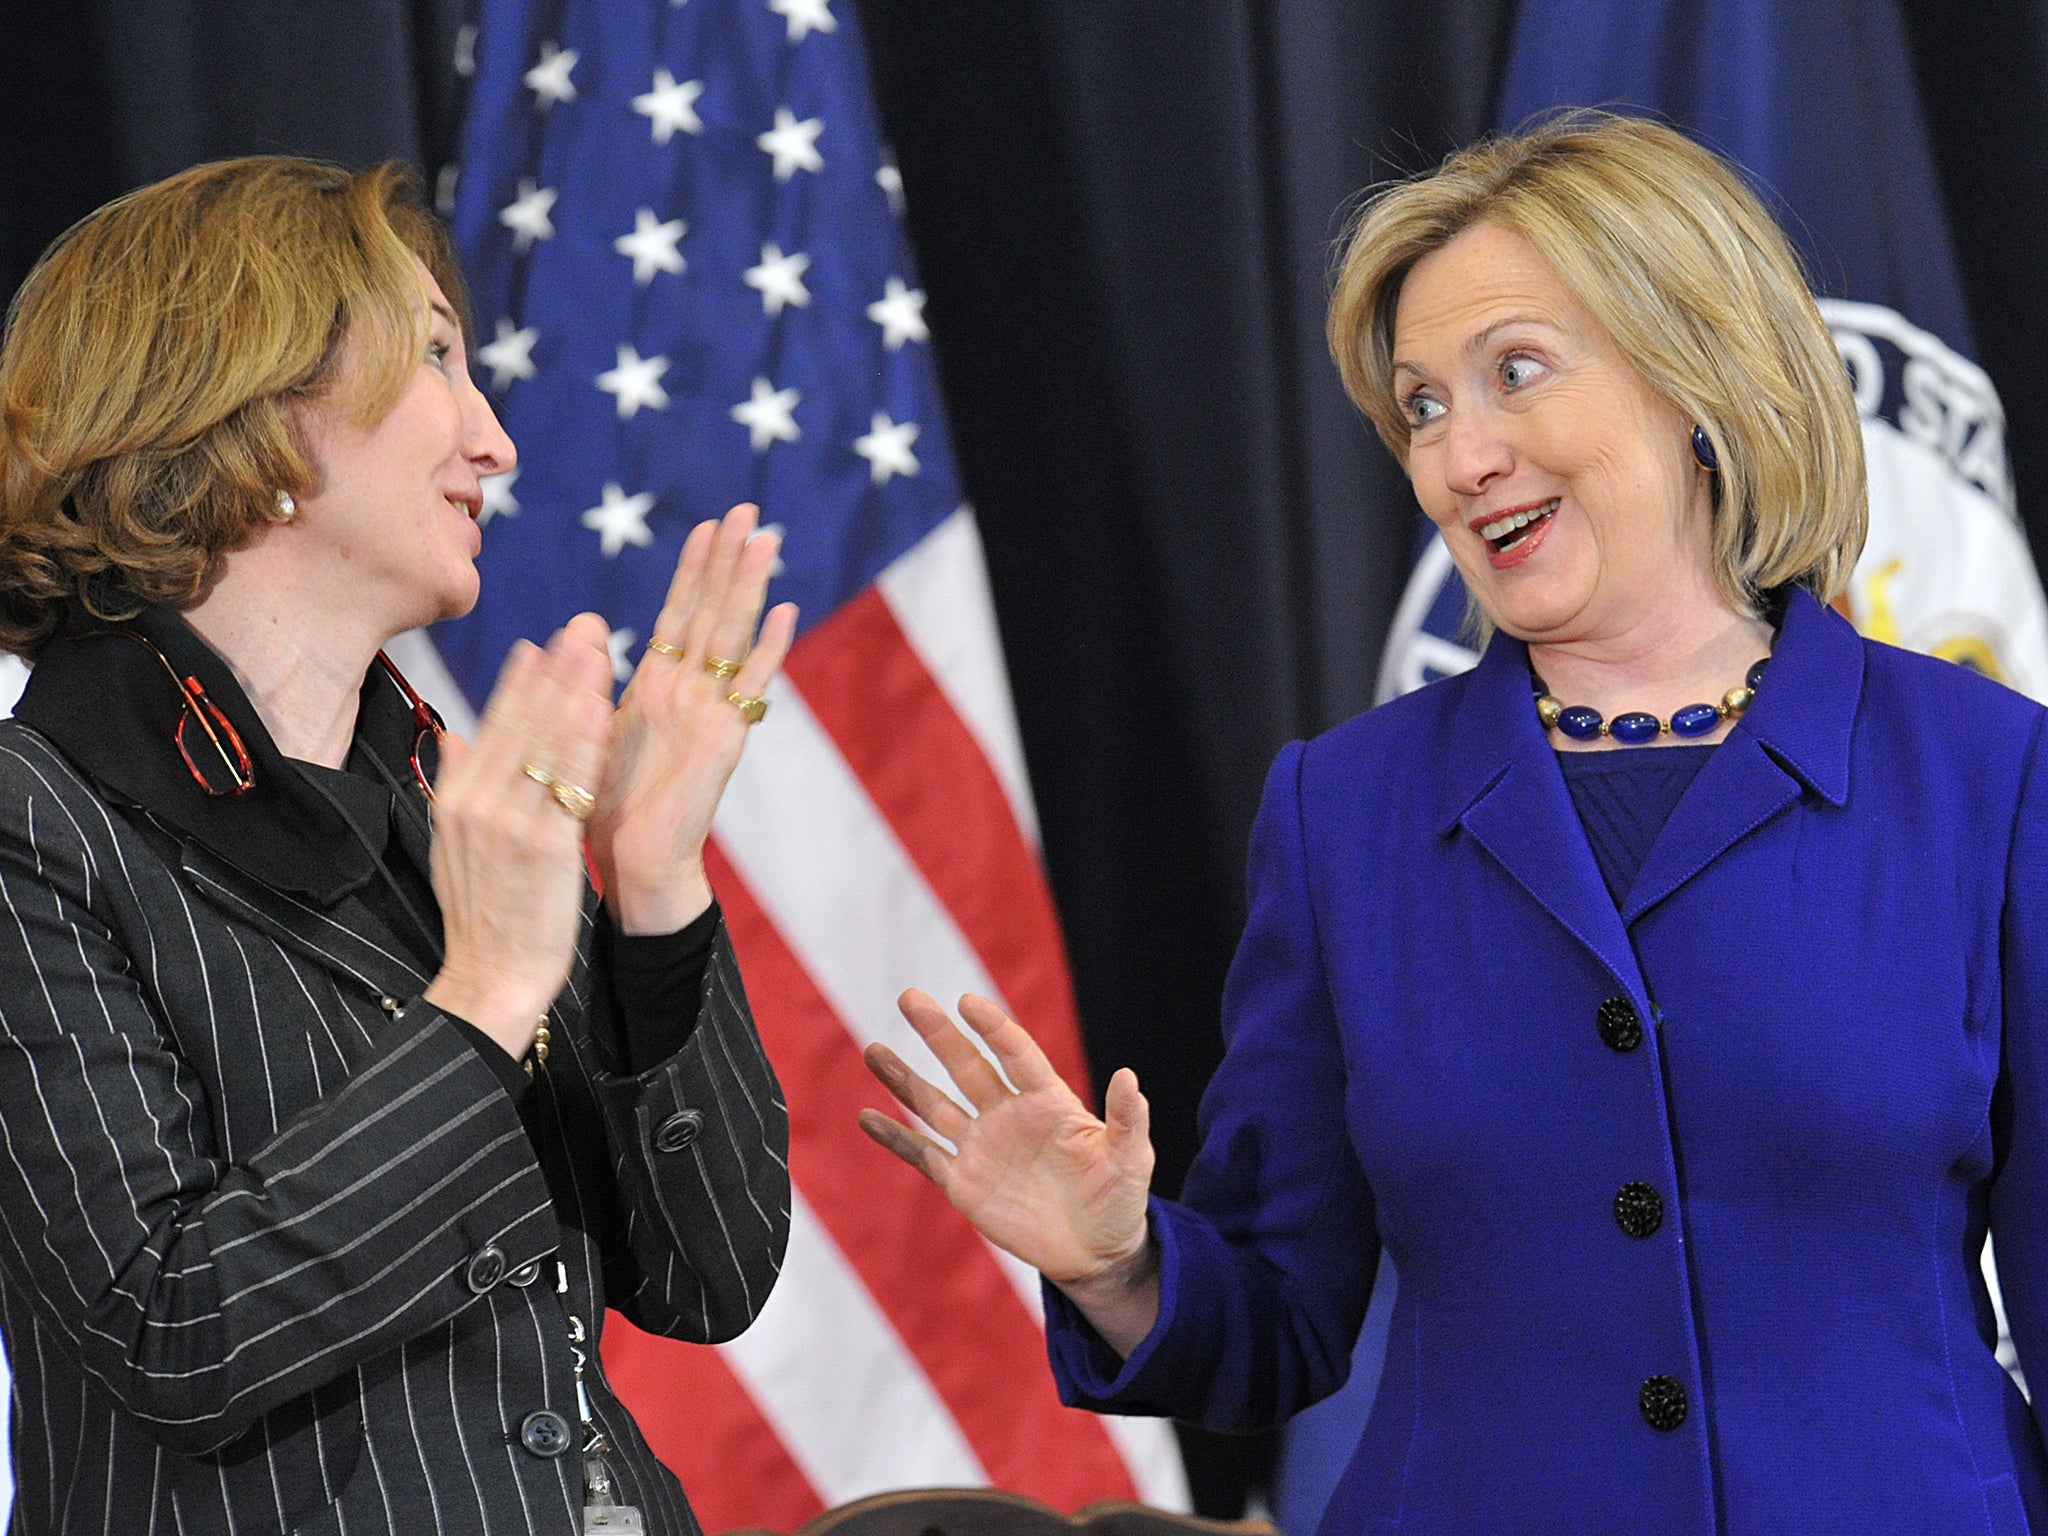 Anne-Marie Slaughter with Hillary Clinton in 2010, when she was the then Secretary of State's Director of Policy Planning